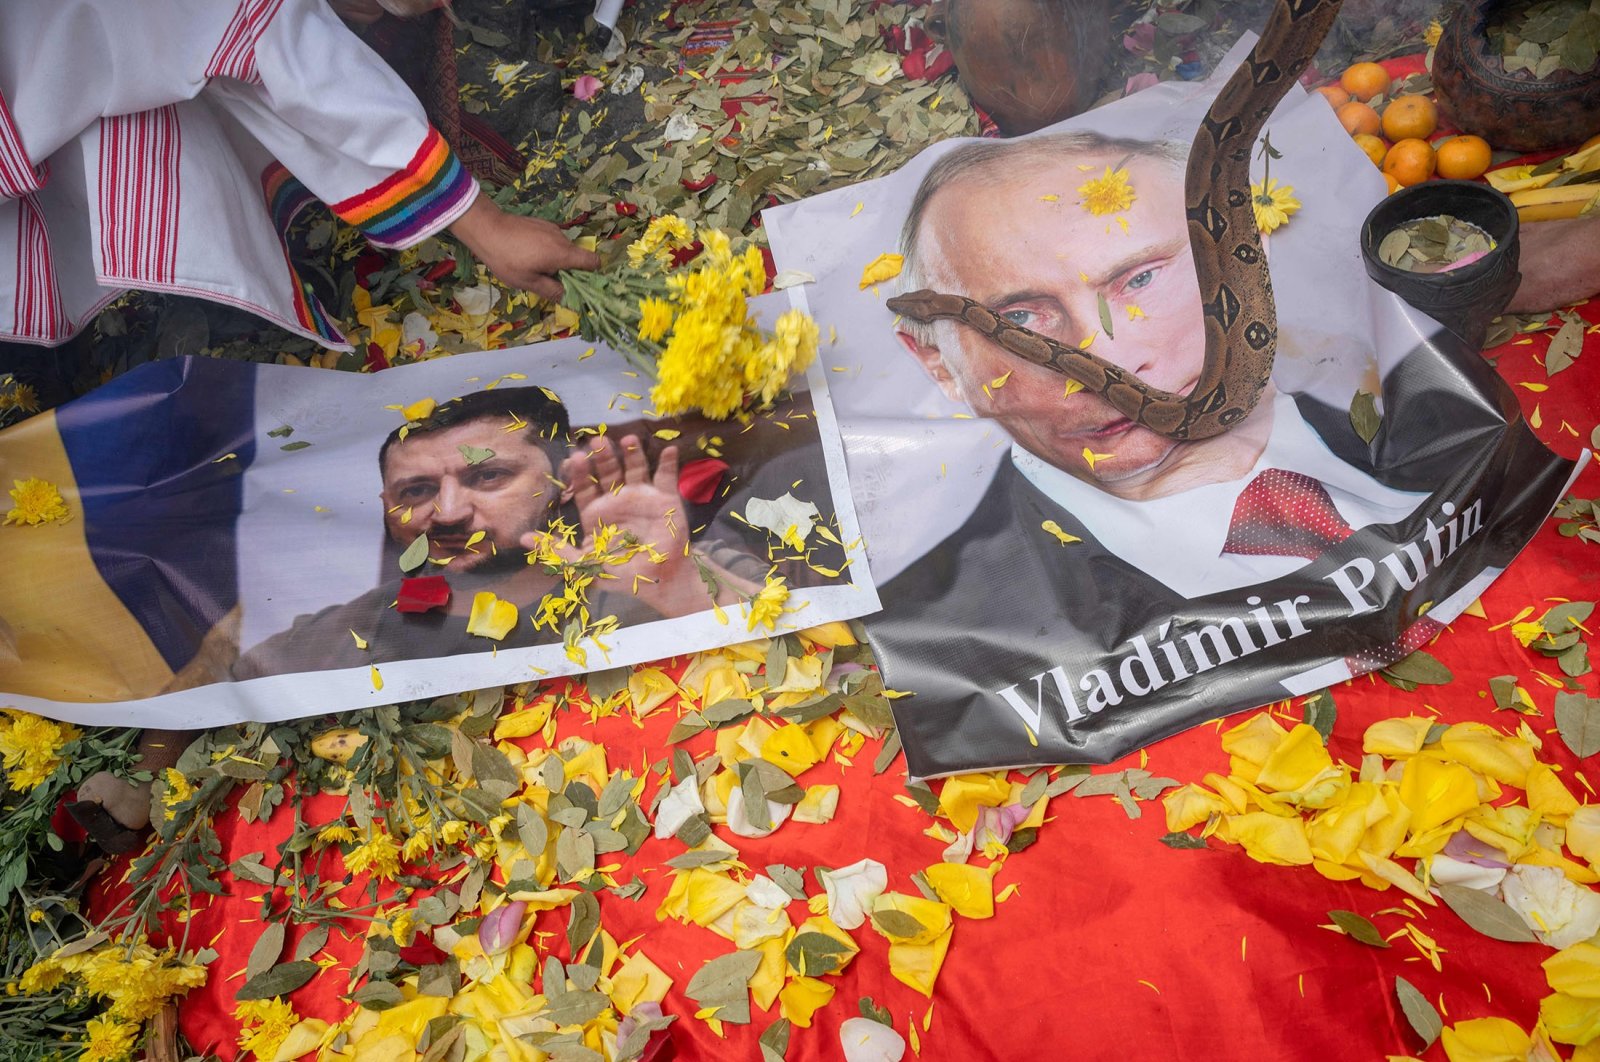 Peruvian shamans display posters of Ukrainian President Volodymyr Zelensky (L) and Russian President Vladimir Putin while executing a ritual, in Lima, Peru, Dec. 28, 2022. (AFP Photo)